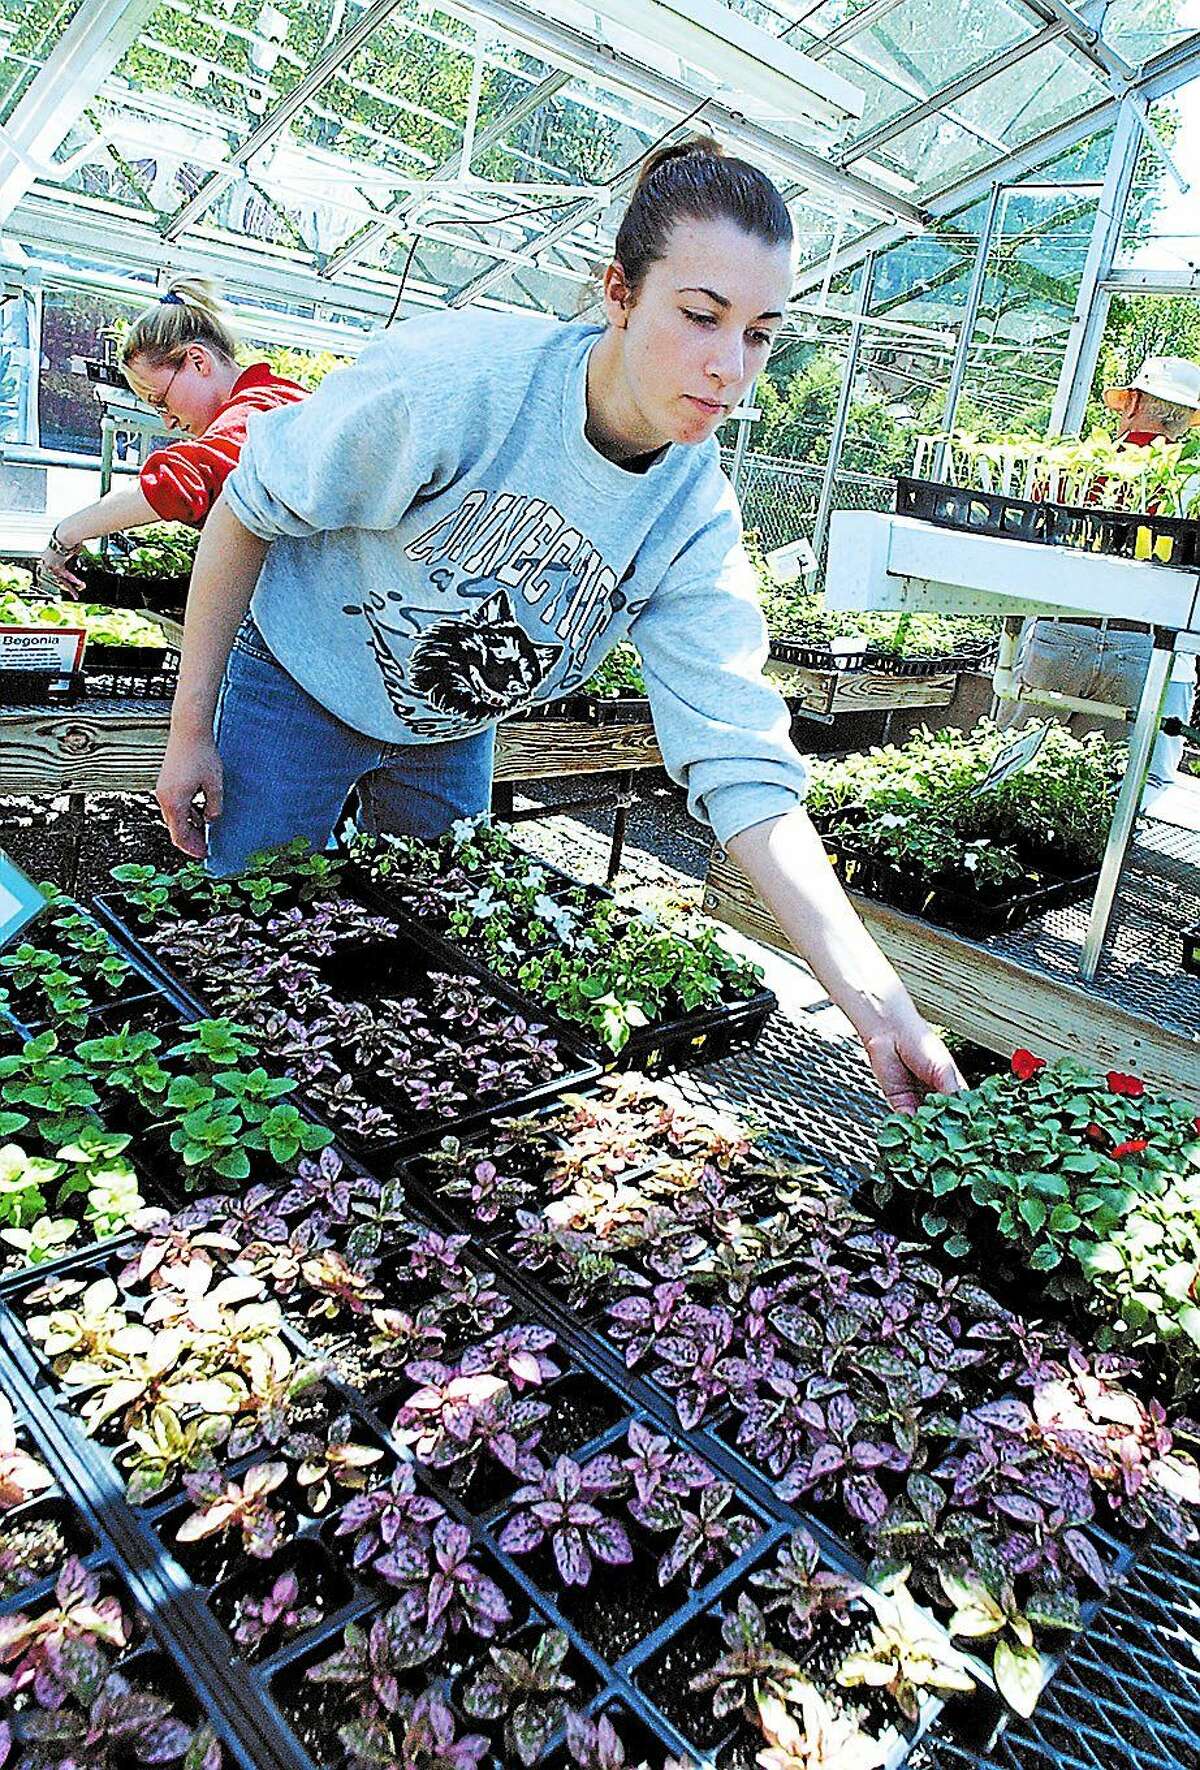 Middletown High School sophomore Ashley Scott works in the VoAg greenhouse during the annual VoAg Plant Sale in this archive photo.